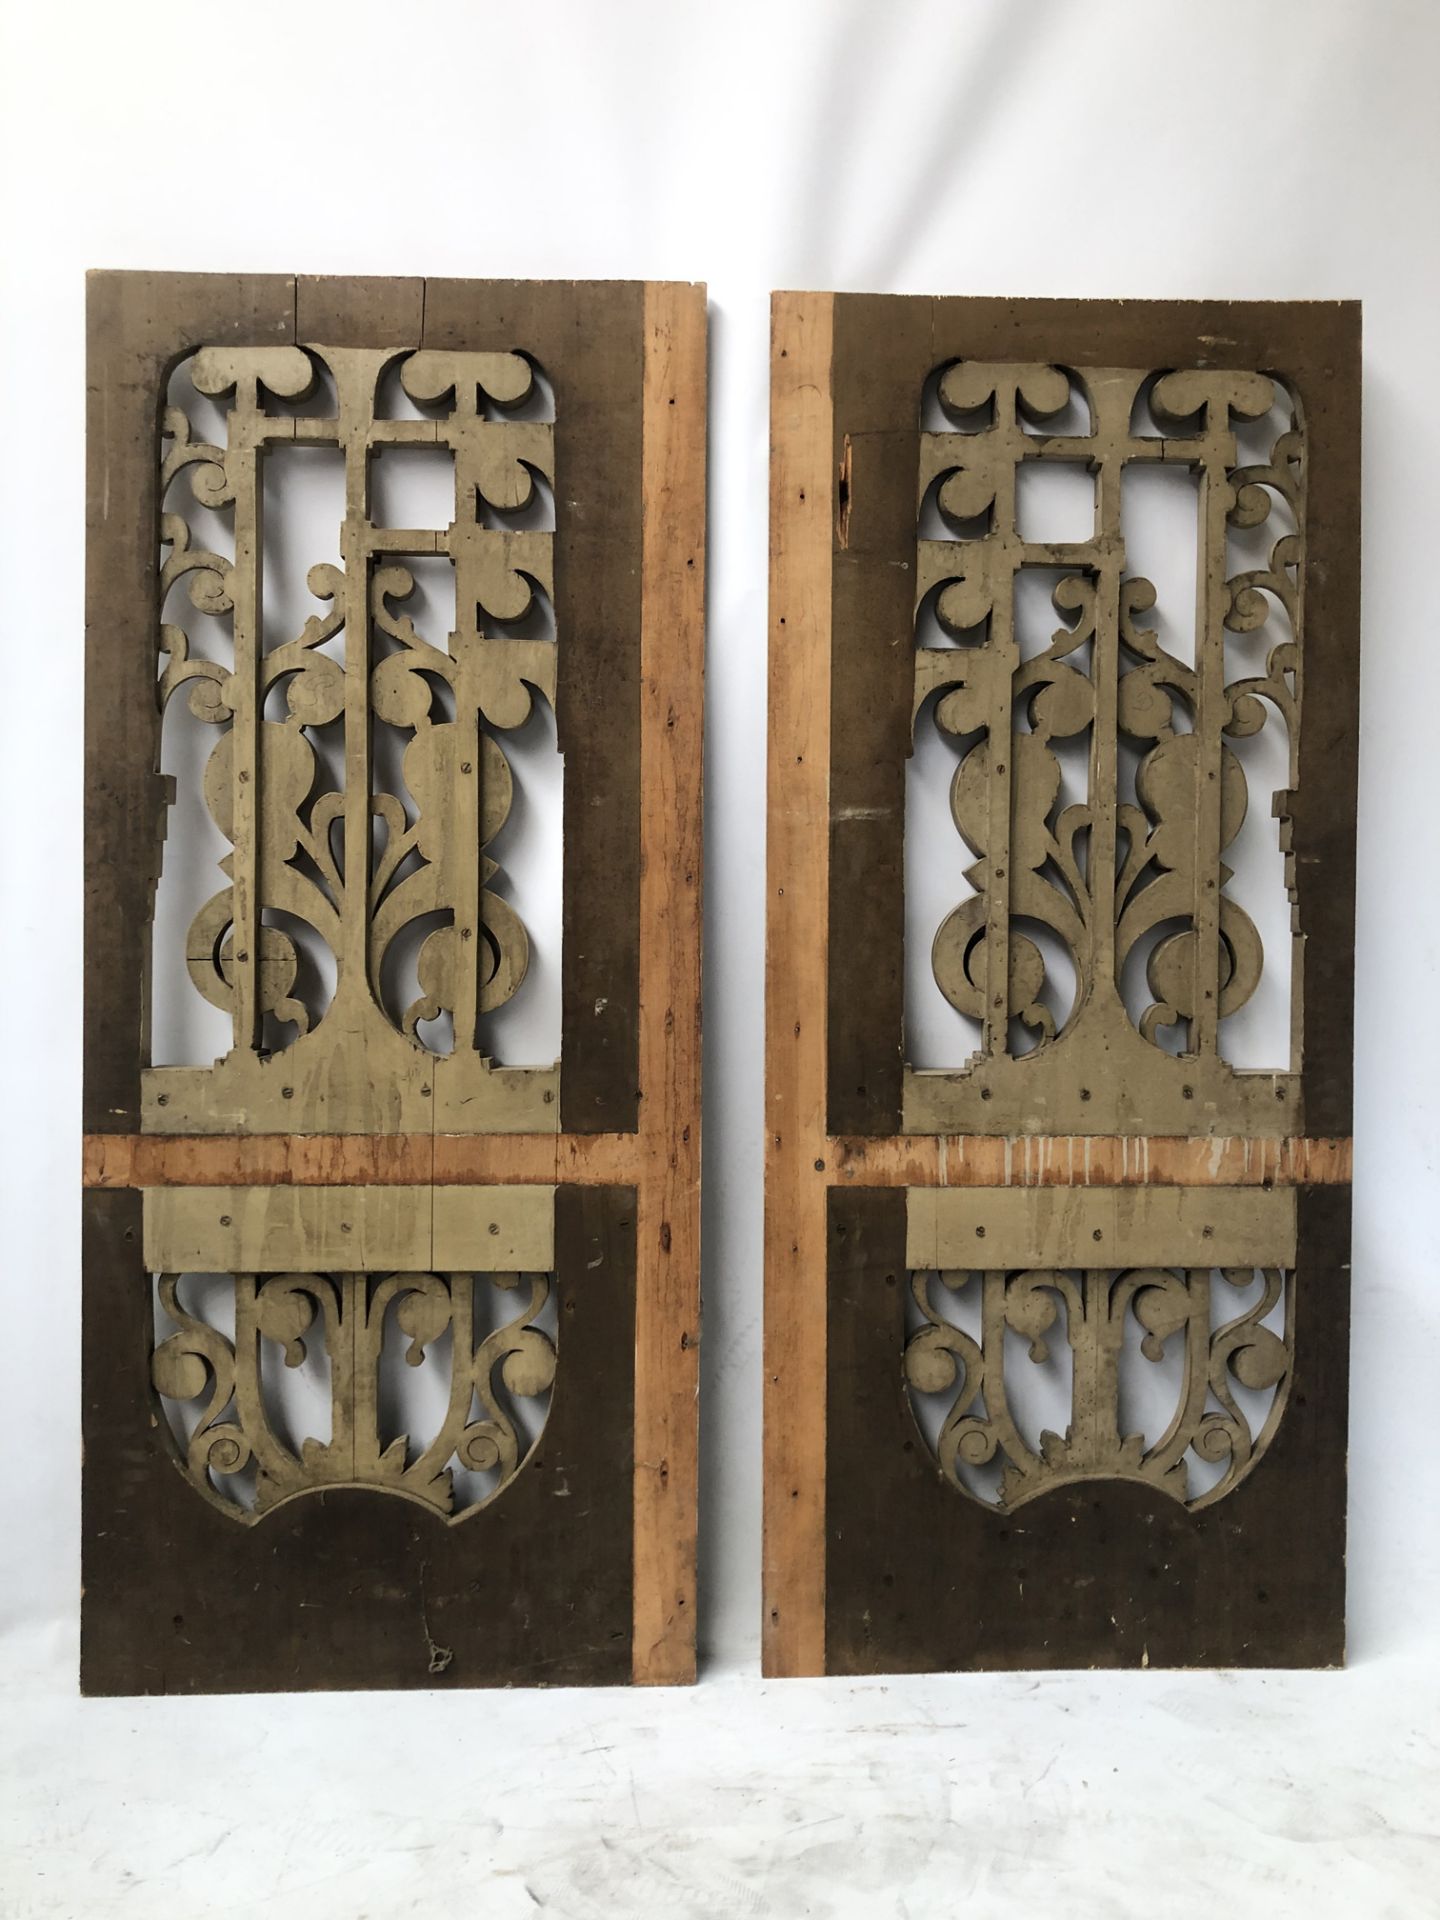 A Set of Two Original Th. Mortier Organ Side Panels - Image 10 of 12